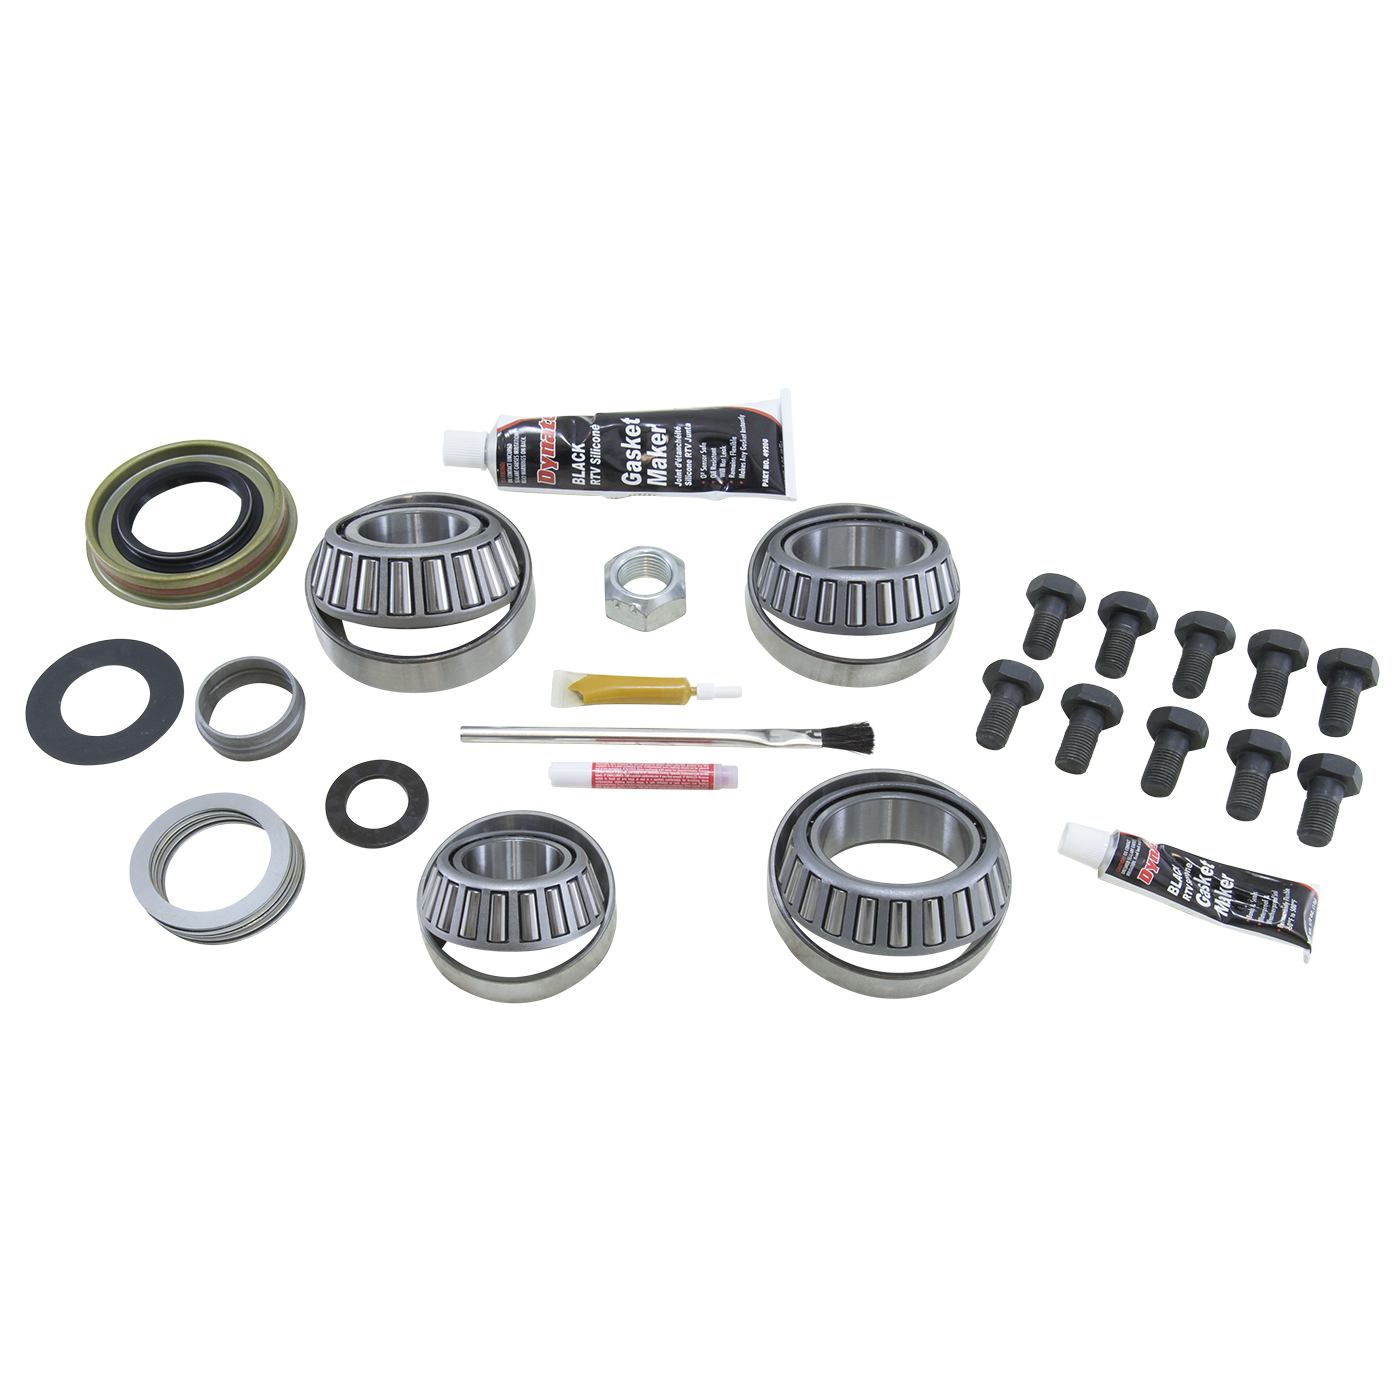 USA Standard Master Overhaul Kit for Nissan M226 Rear Differential